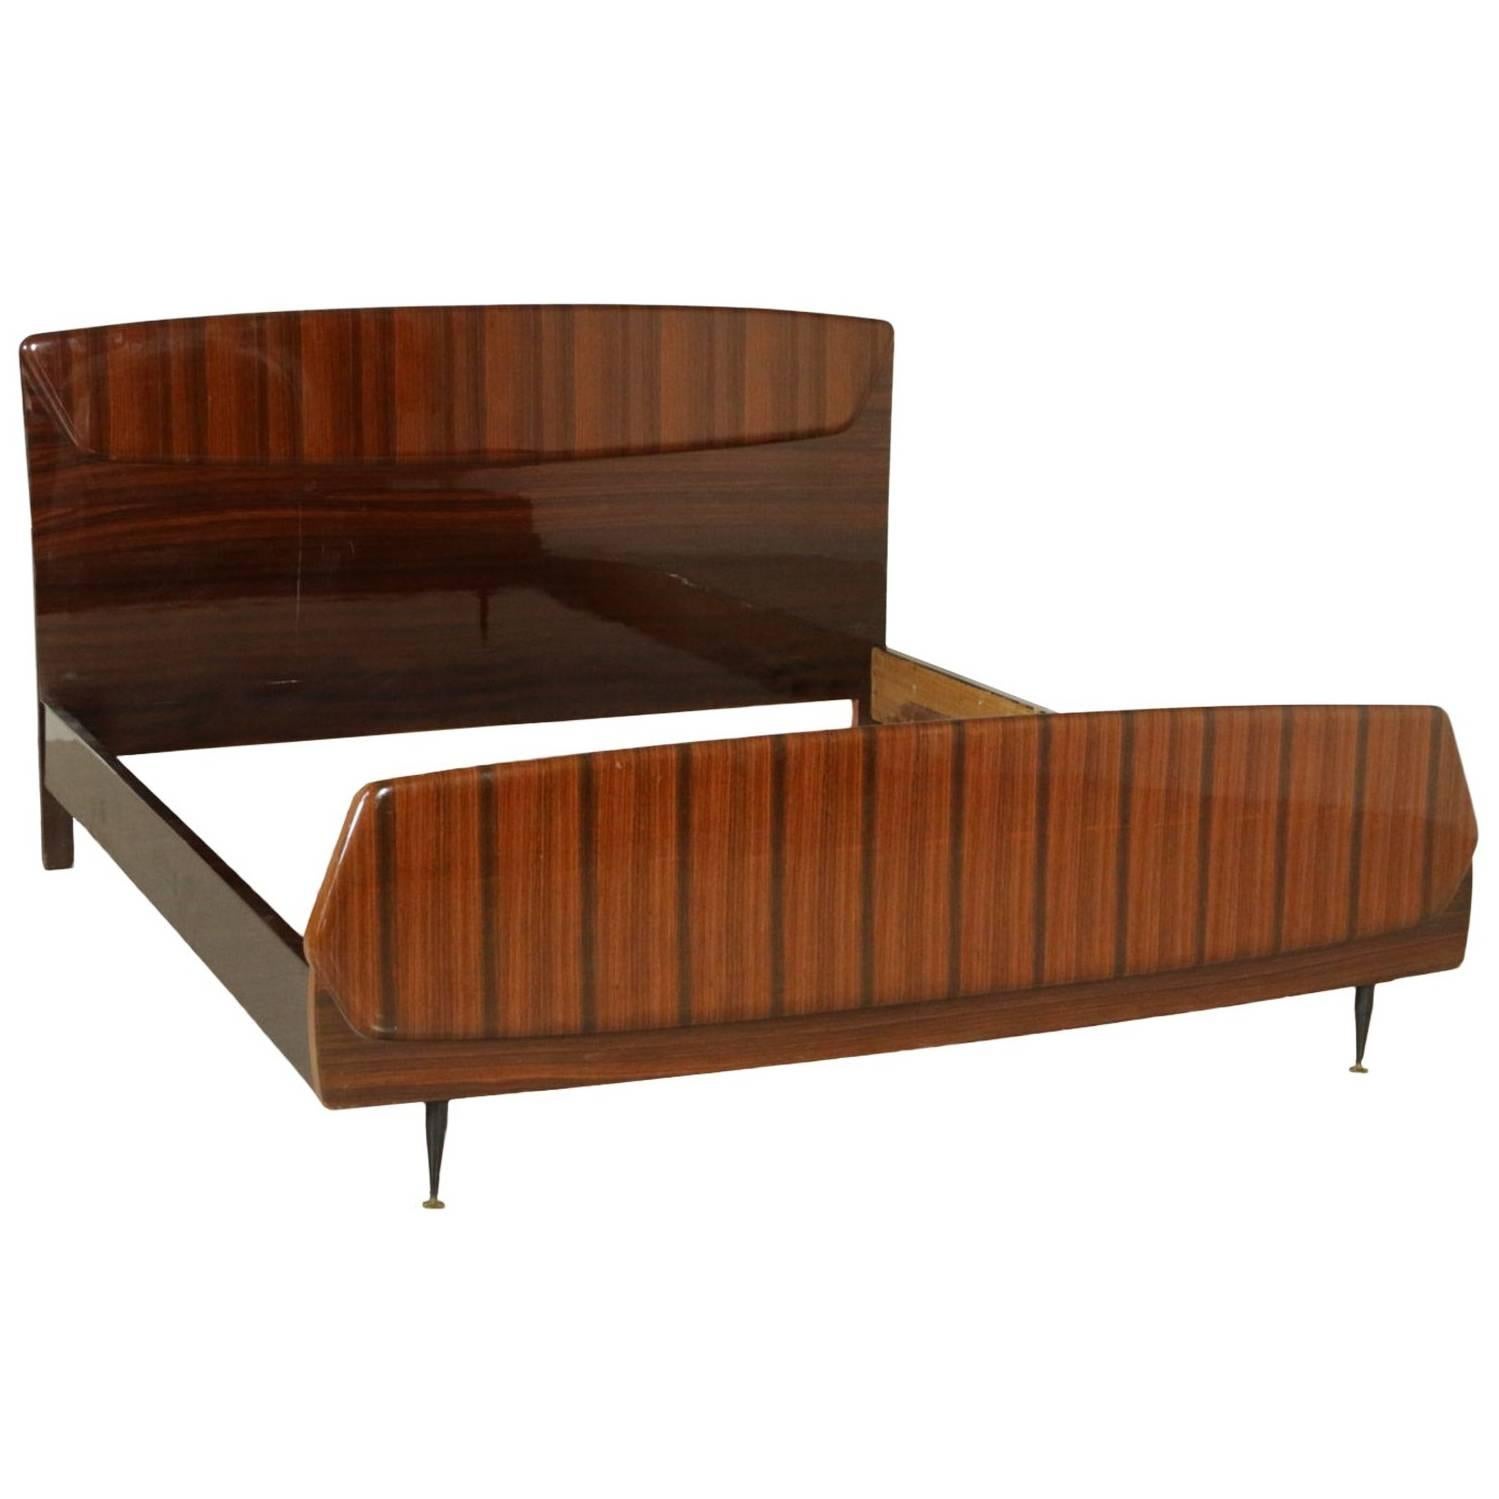 Double Bed Rosewood Veneer Vintage Manufactured in Italy, 1950s-1960s